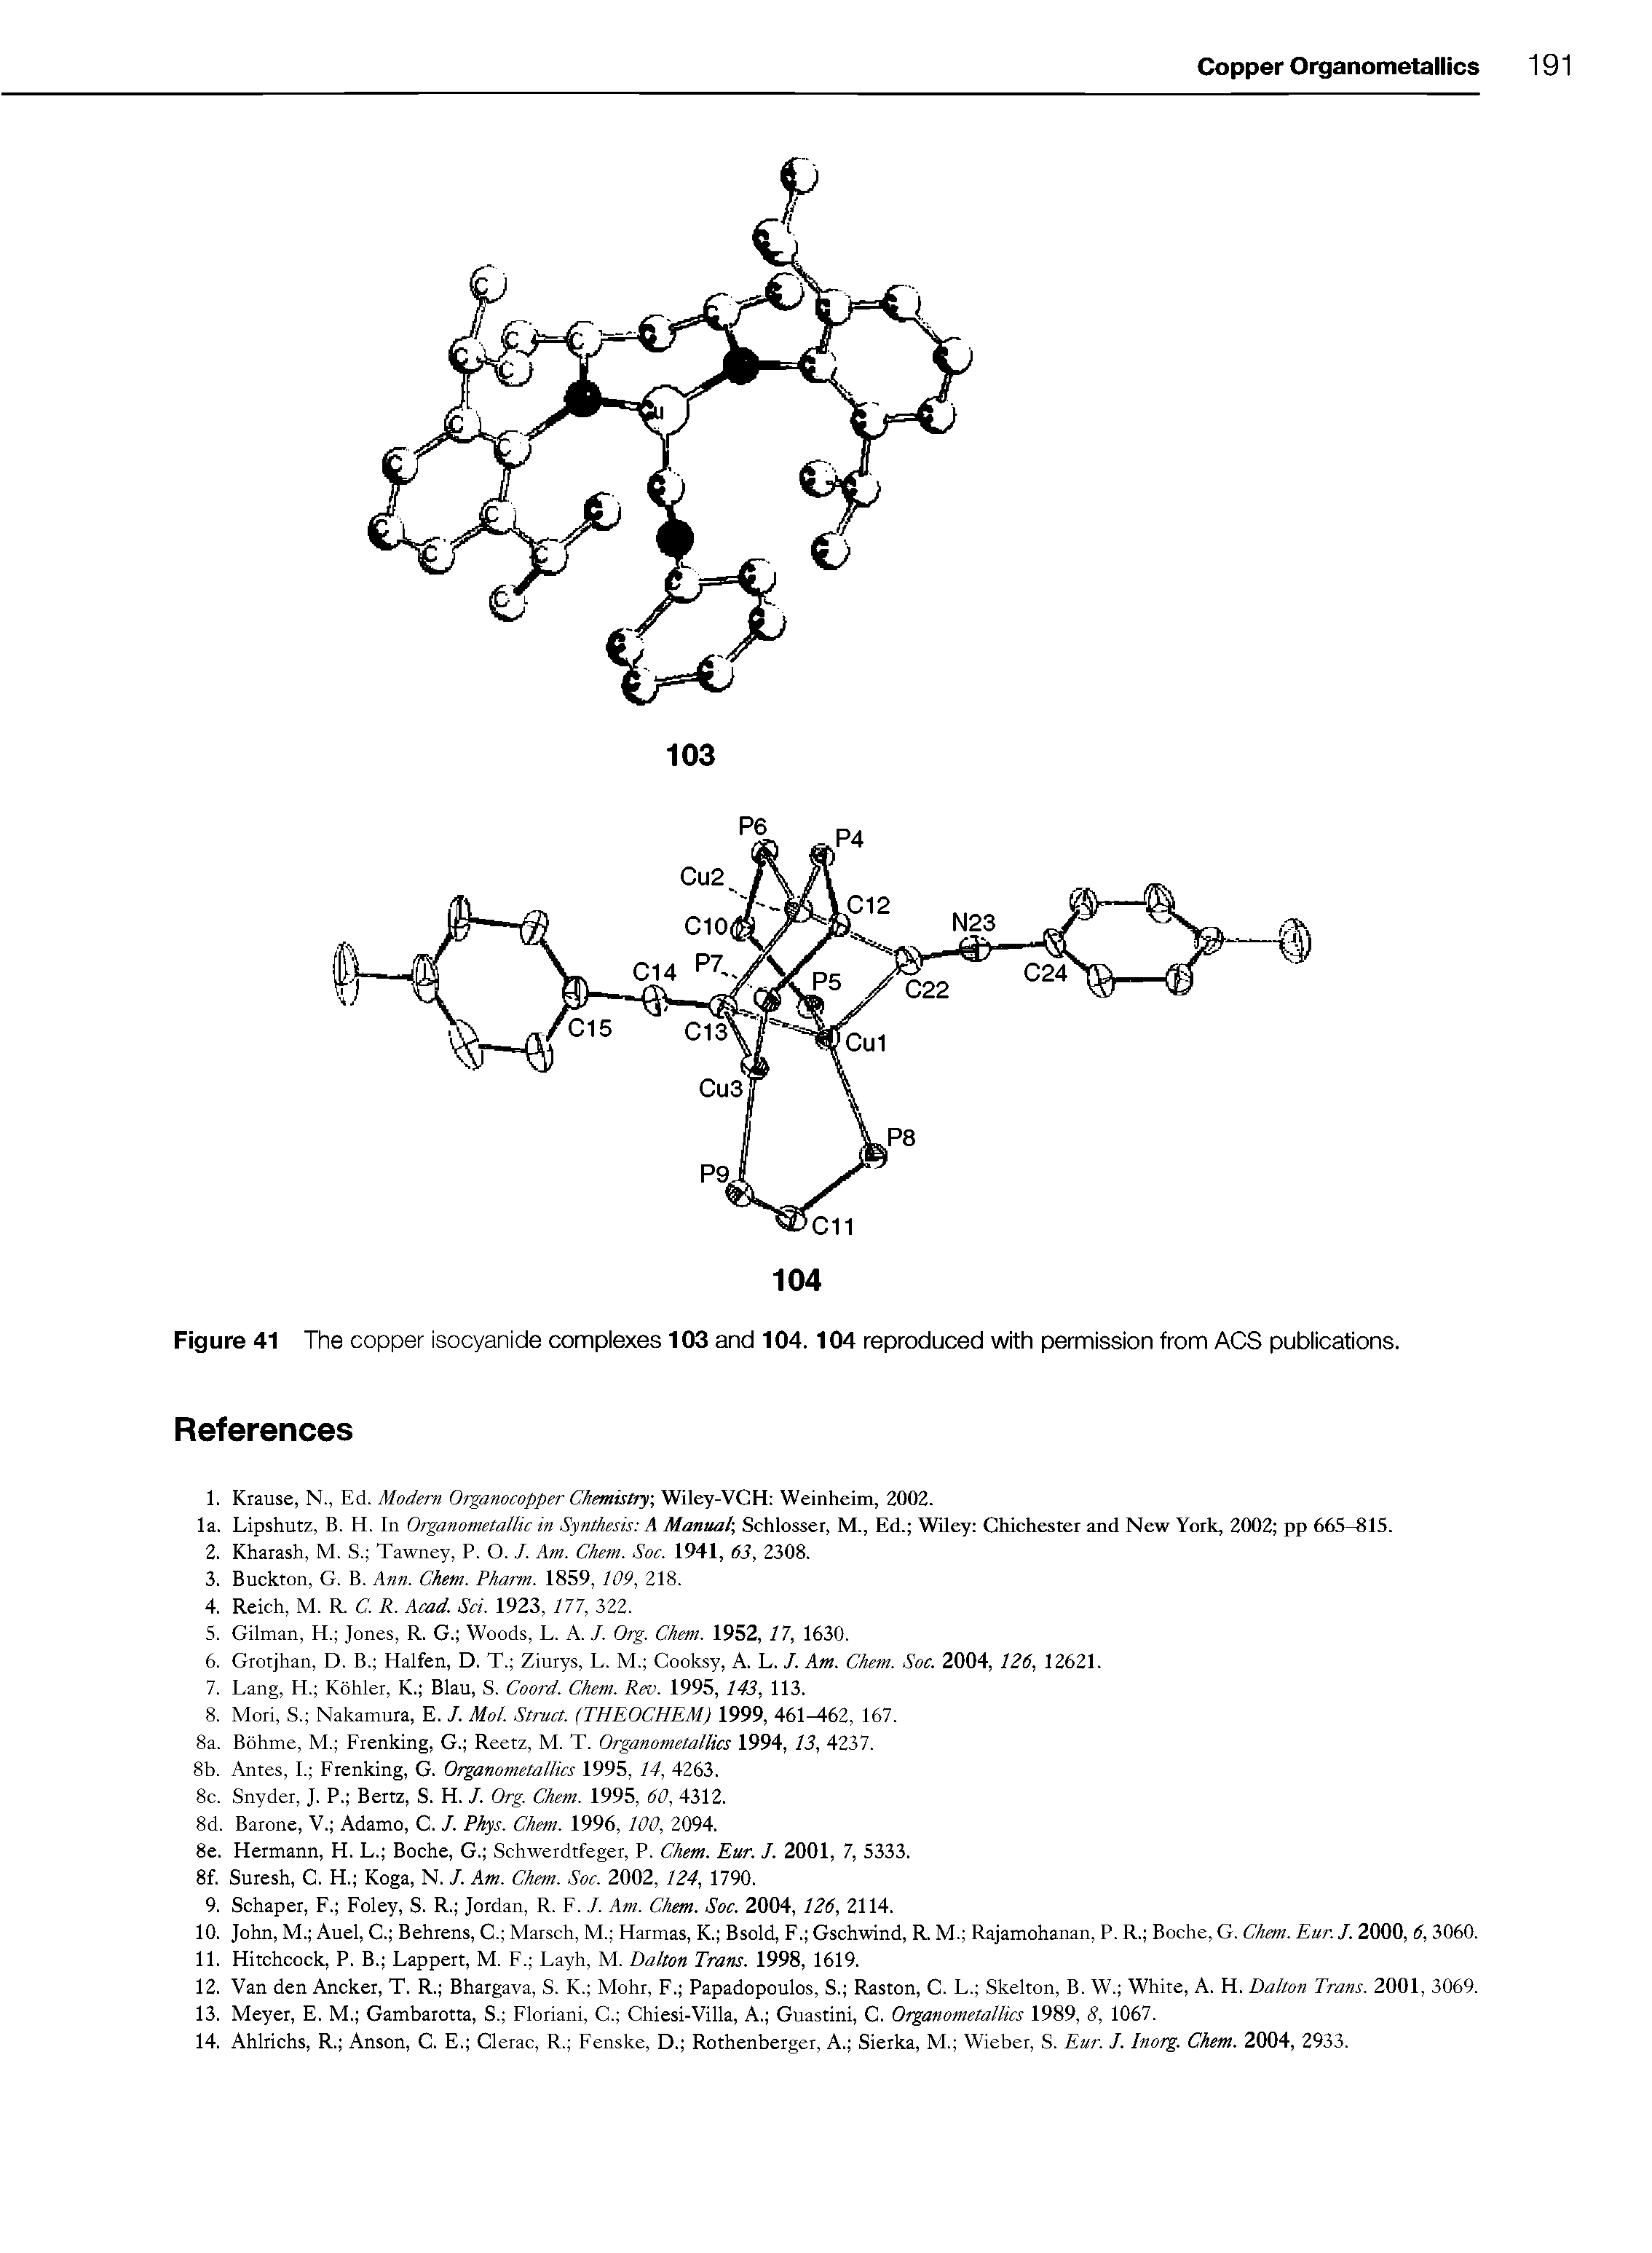 Figure 41 The copper isocyanide complexes 103 and 104.104 reproduced with permission from ACS publications.